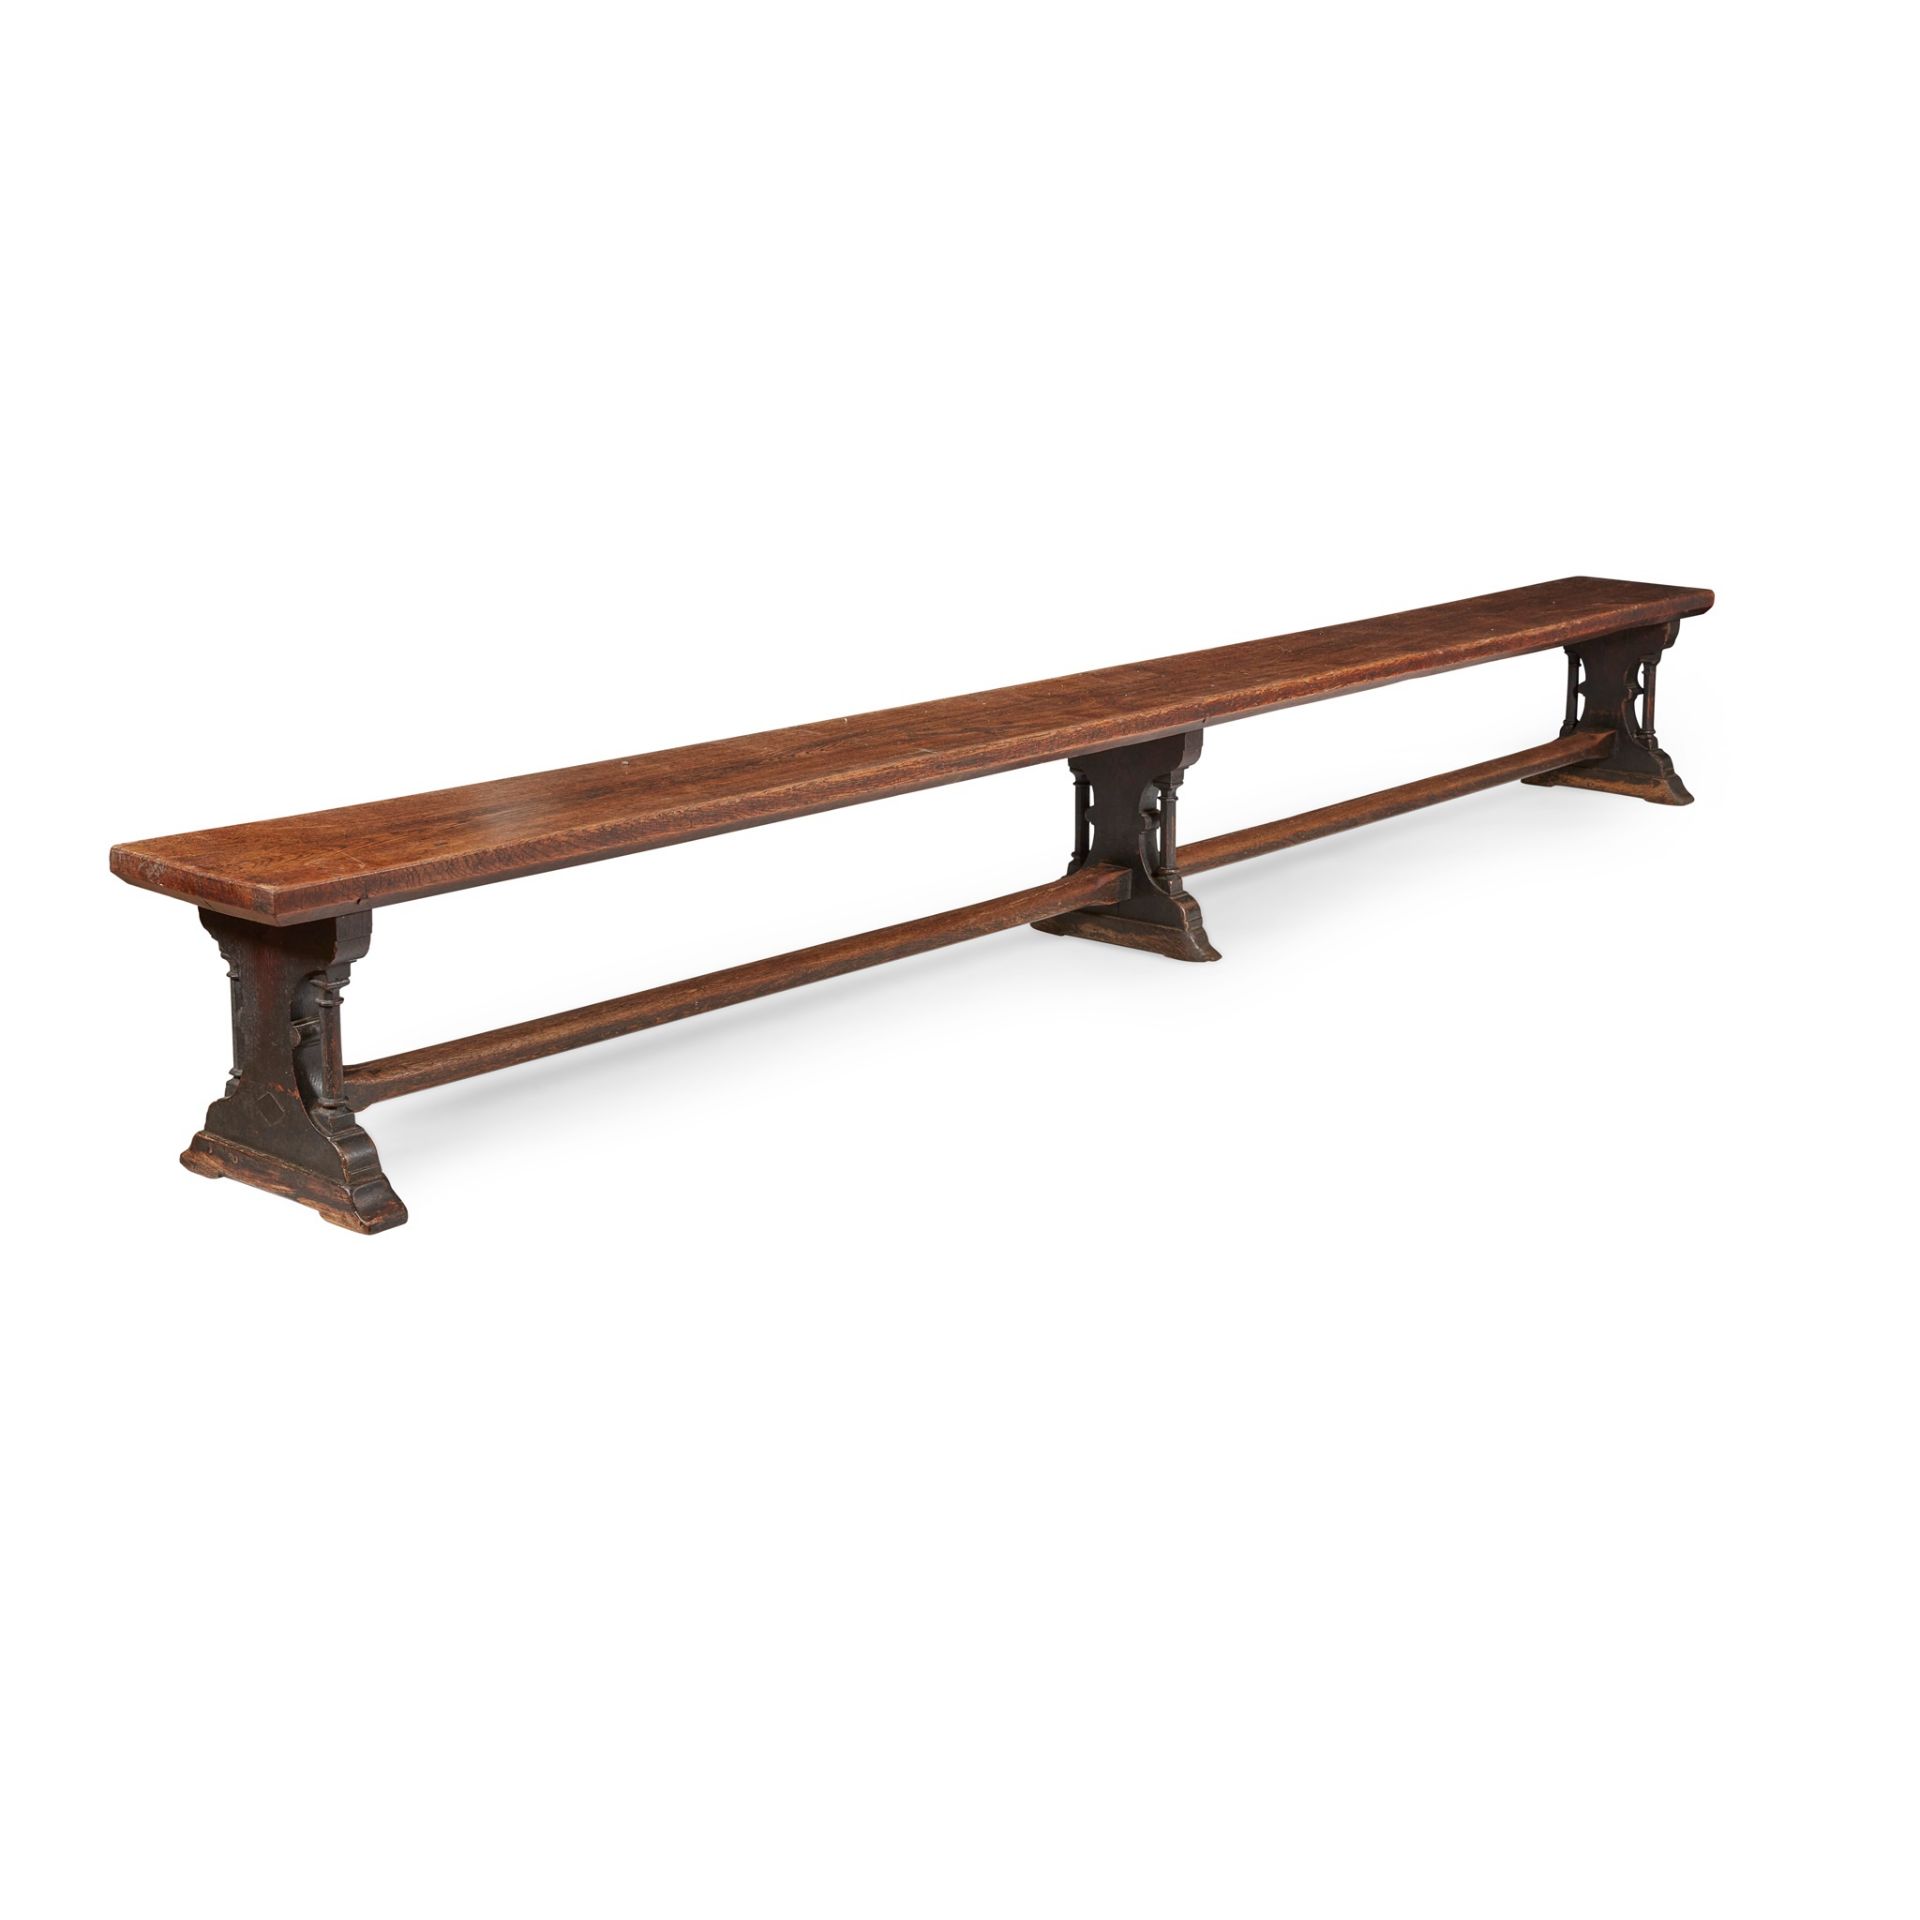 ENGLISH PAIR OF GOTHIC REVIVAL BENCHES, CIRCA 1870 - Image 2 of 3